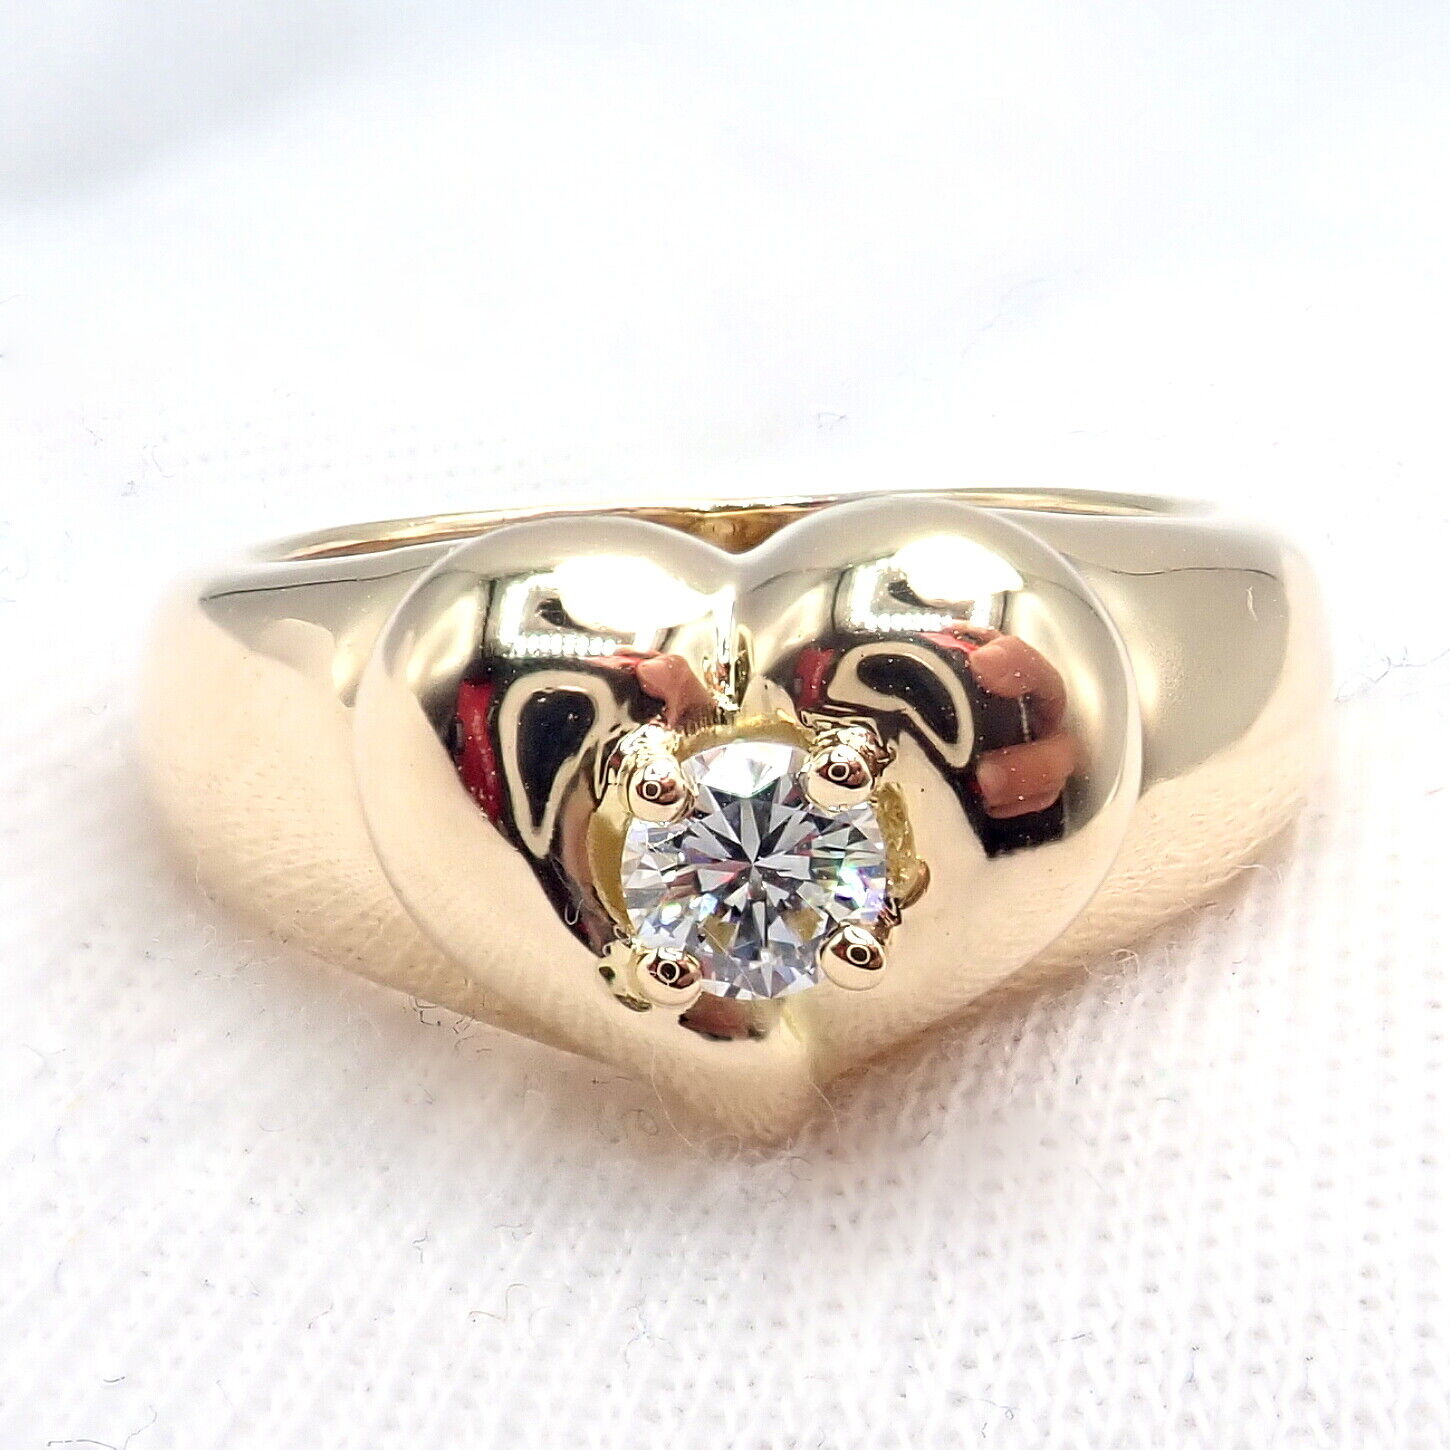 Van Cleef & Arpels Jewelry & Watches:Fine Jewelry:Rings Rare! Authentic Van Cleef & Arpels 18k Yellow Gold Diamond Heart Ring